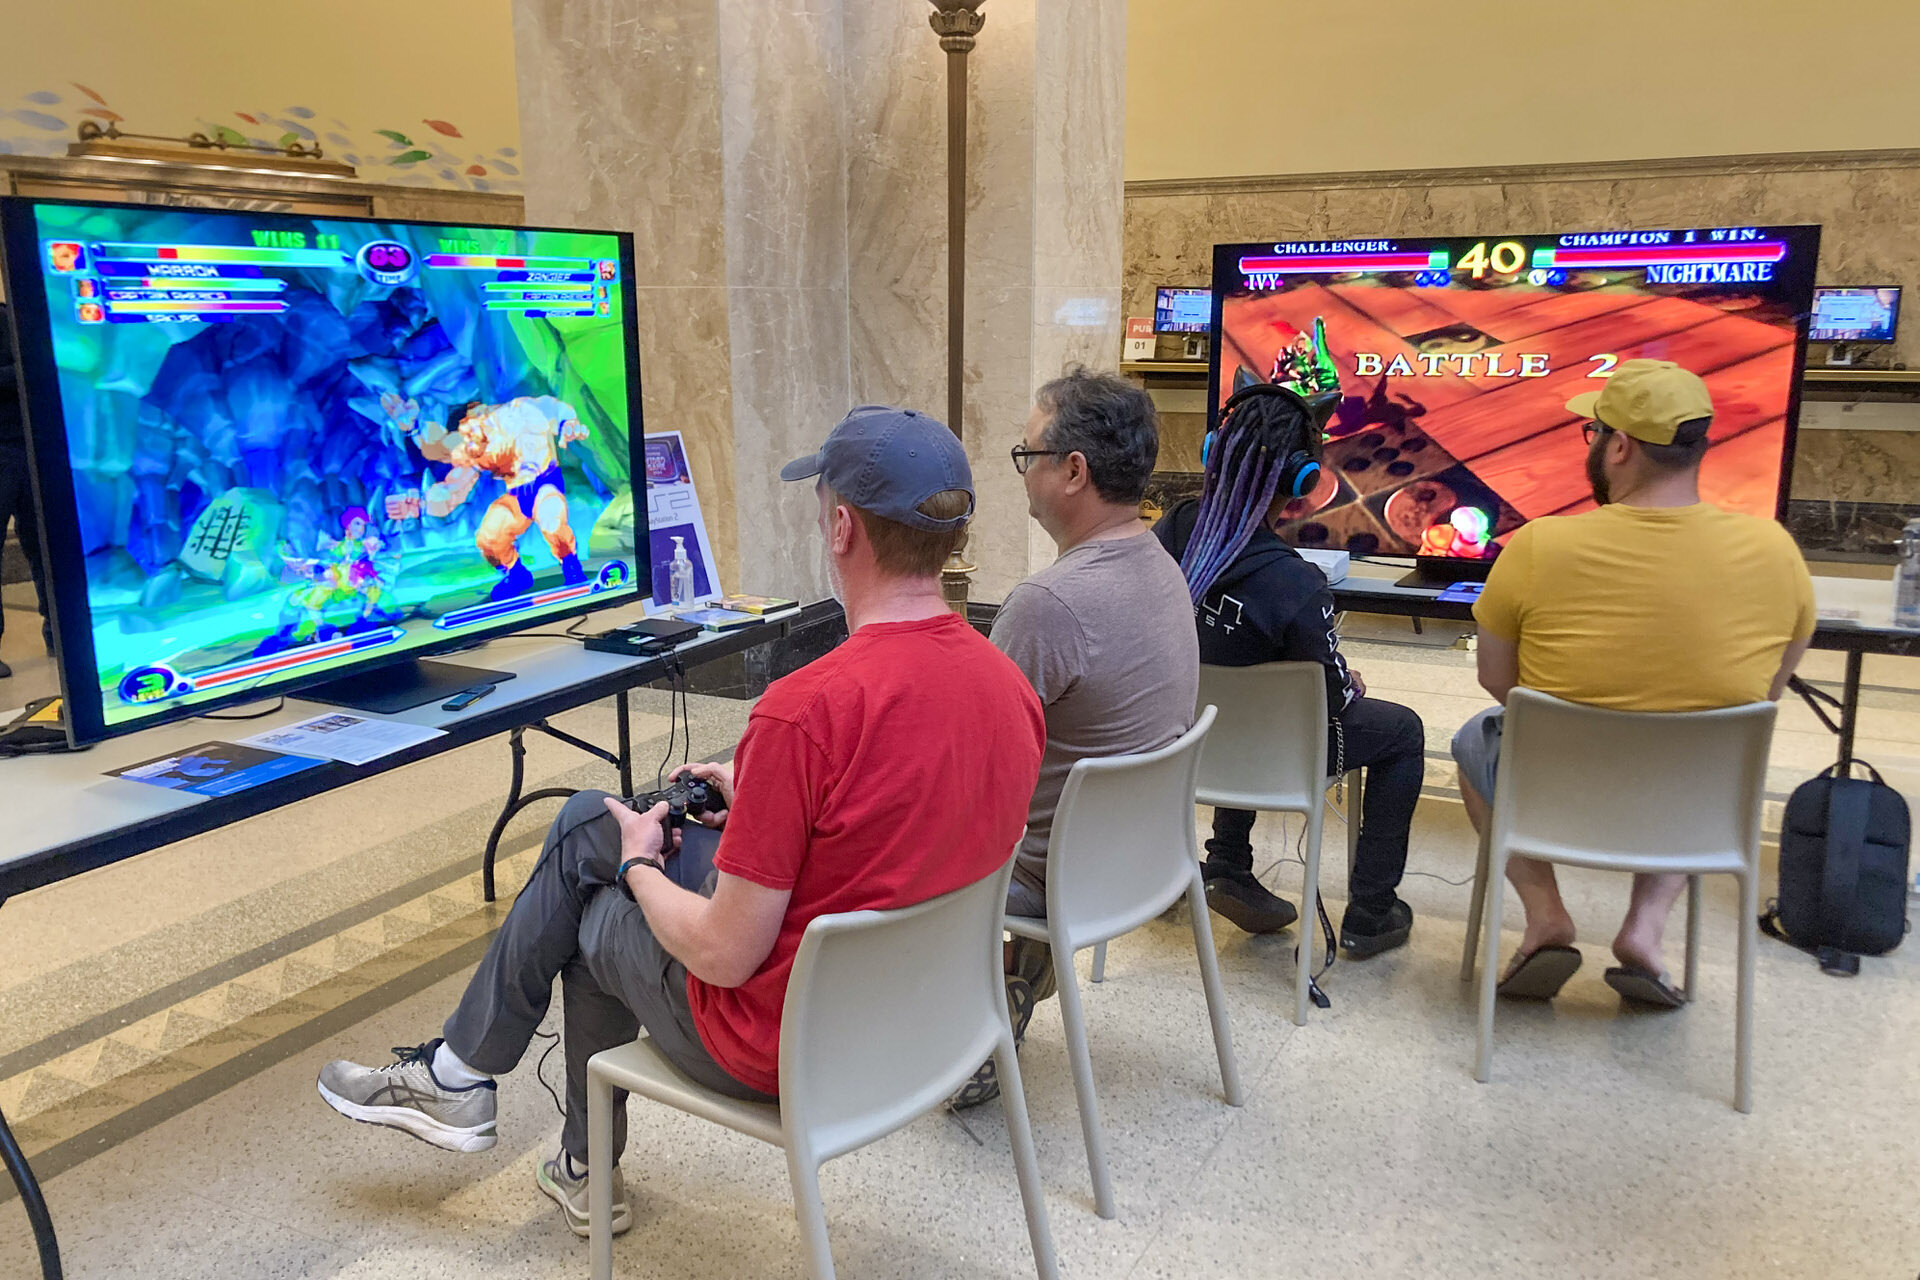 Final Fridays event at the Central Library - retro gaming night with big screens